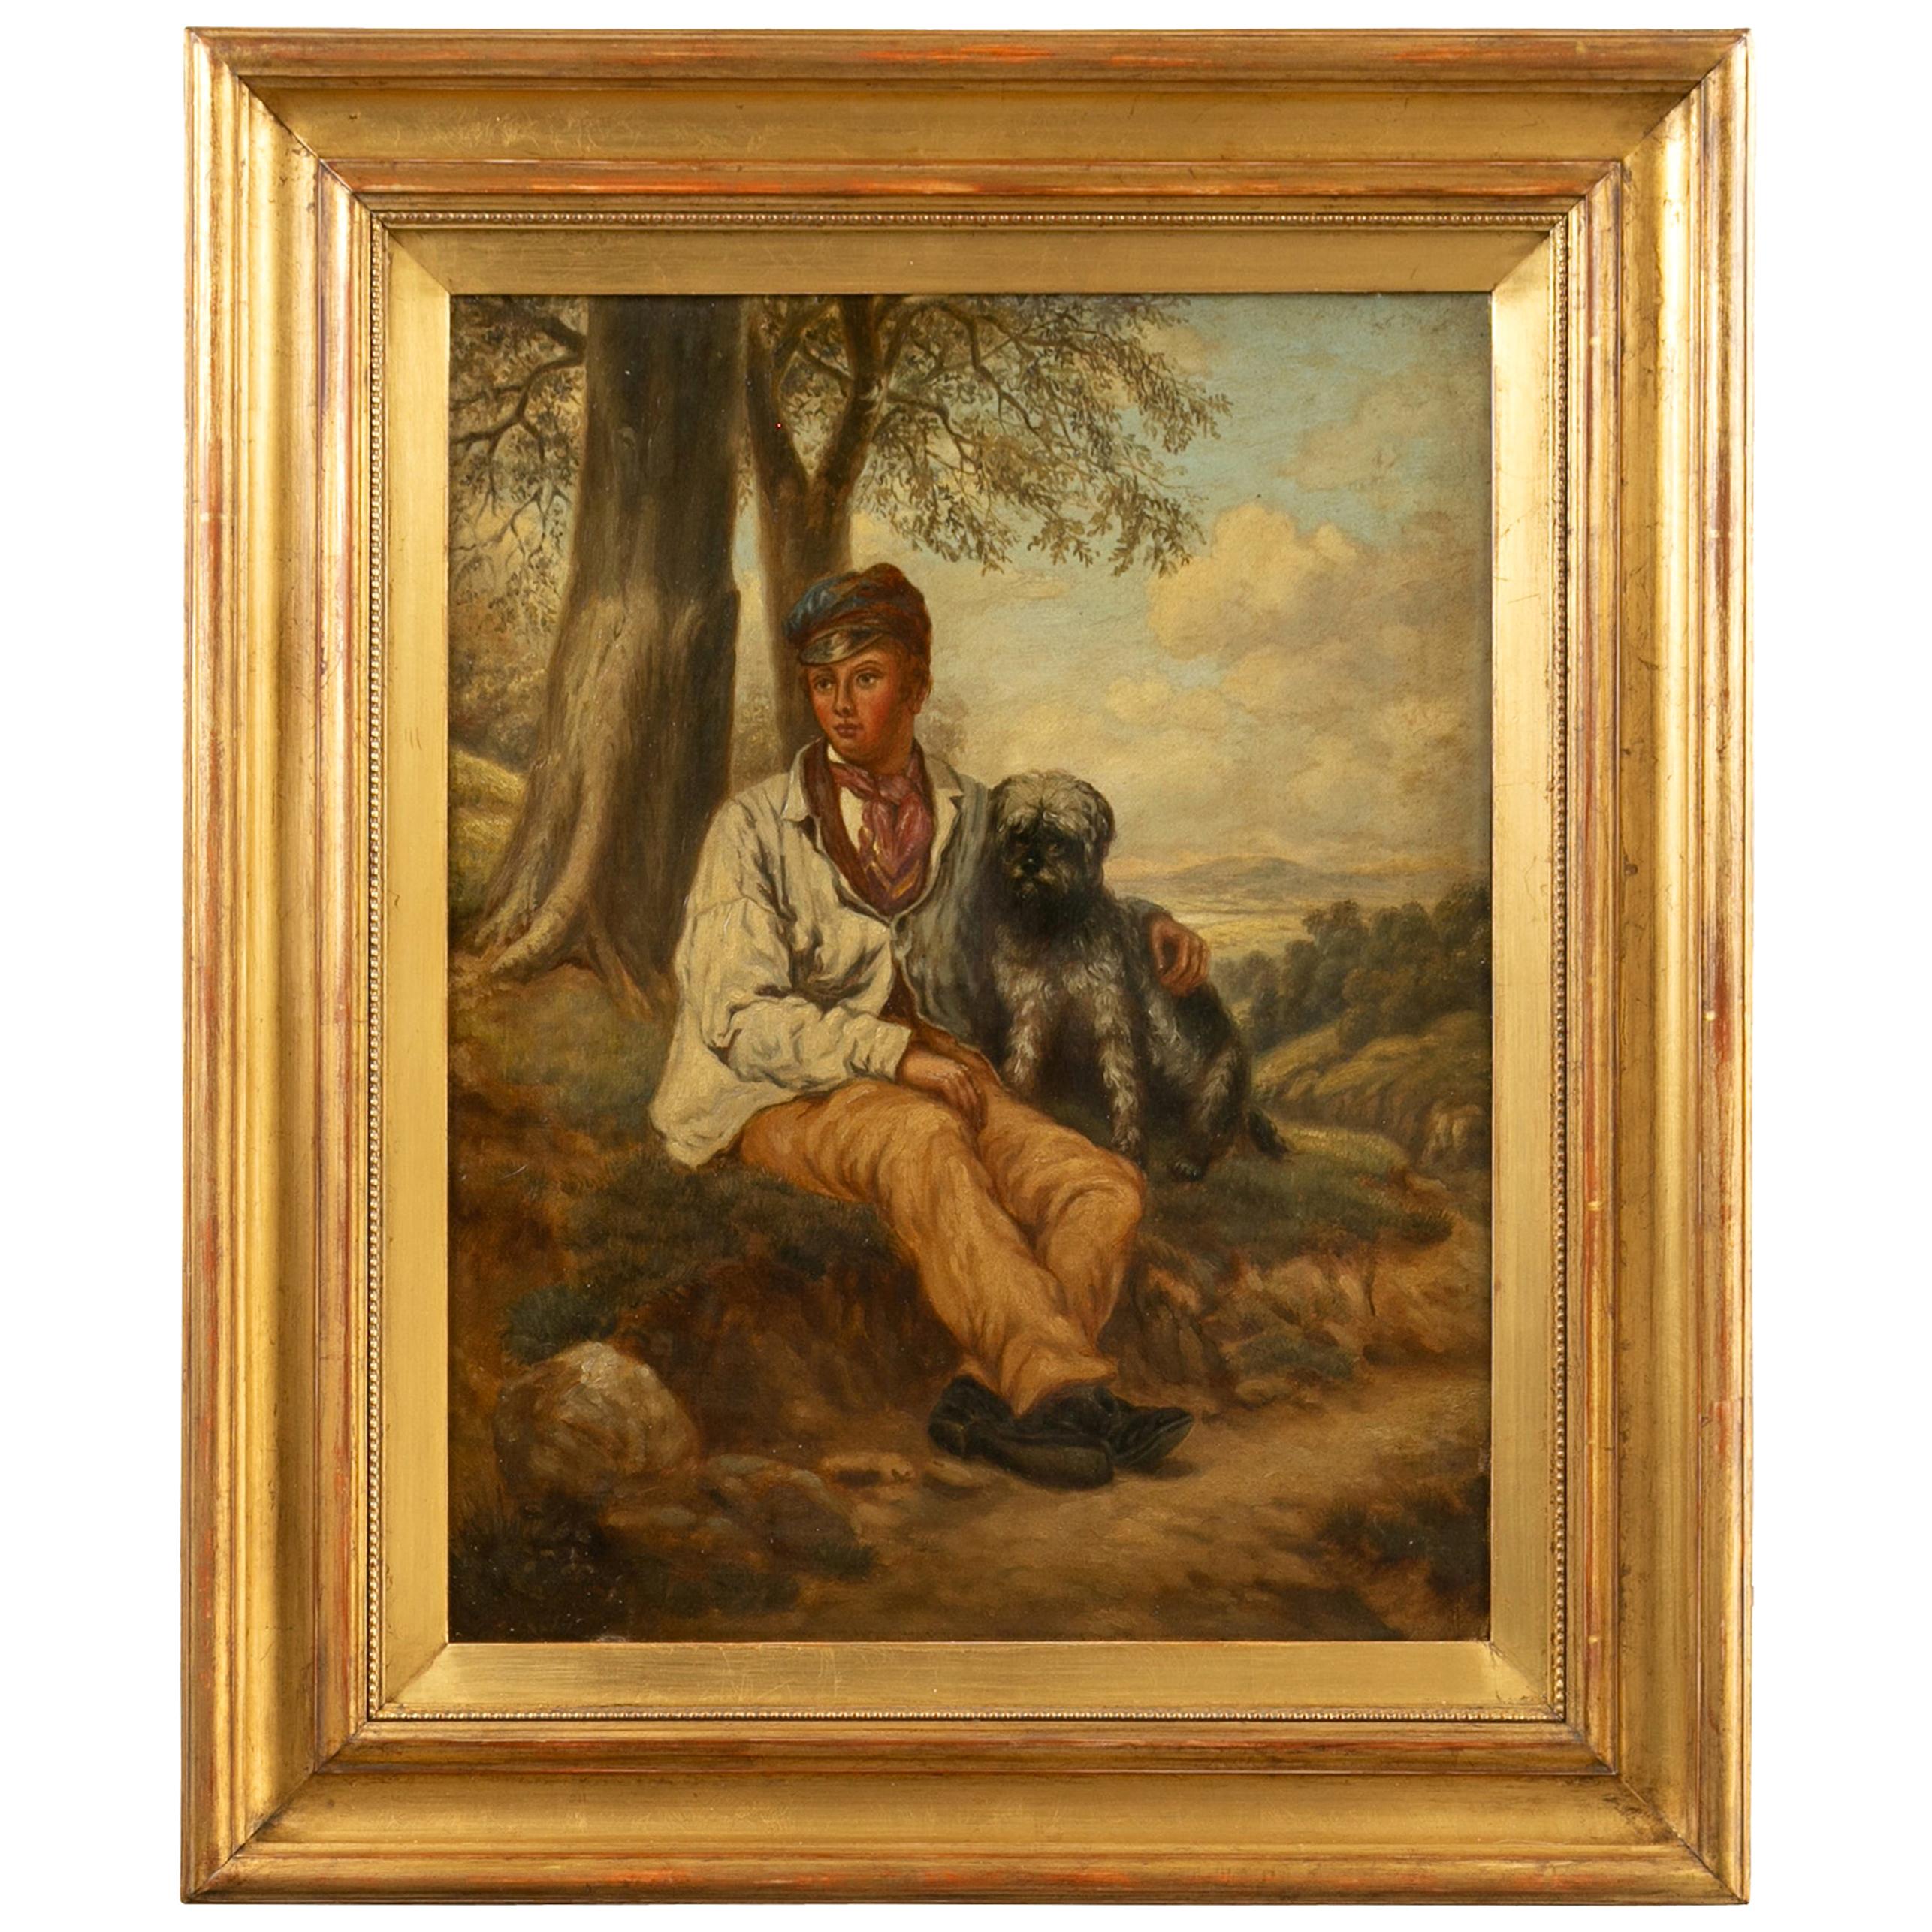 English 1880s Oil on Canvas Painting of a Boy with His Dog in Antique Gilt Frame